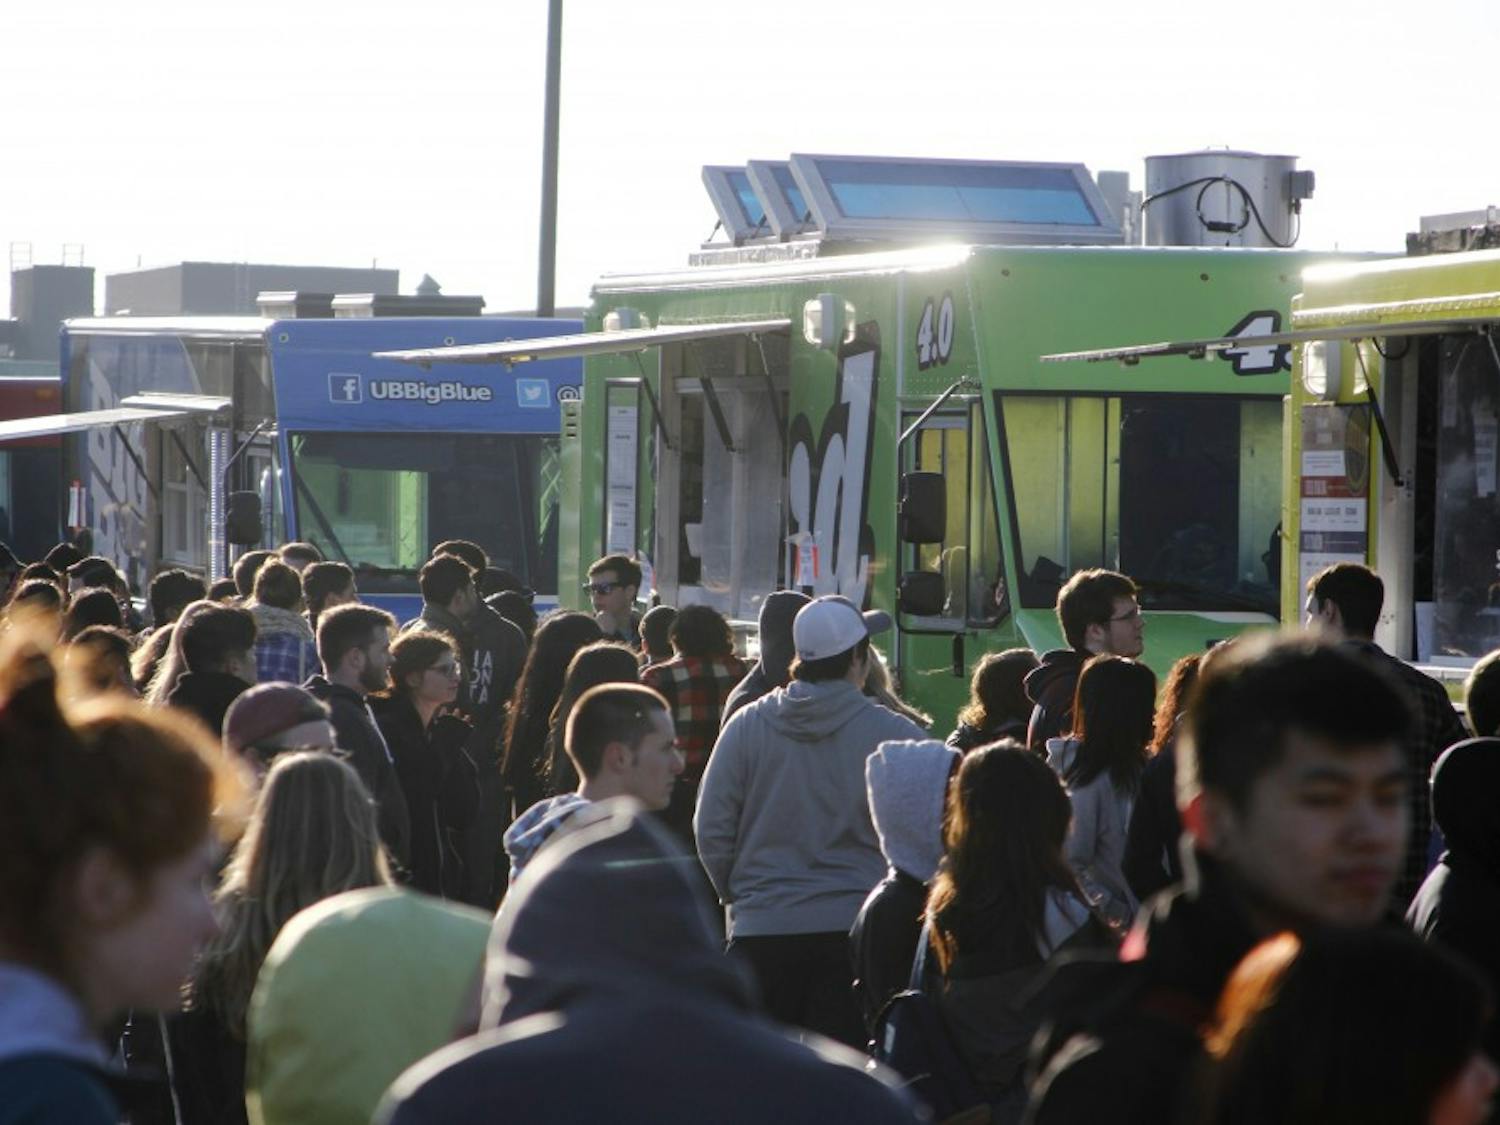 The food trucks at Buffalo Untapped, like the popular Llyoyd Taco Truck and Franks Gourmet Hot Dogs, were busy from when the event opened at 5 p.m. until the event ended at 9 p.m. Lloyd Taco Truck and UB’s own Big Blue served people until their lines ended around 9:10 p.m.